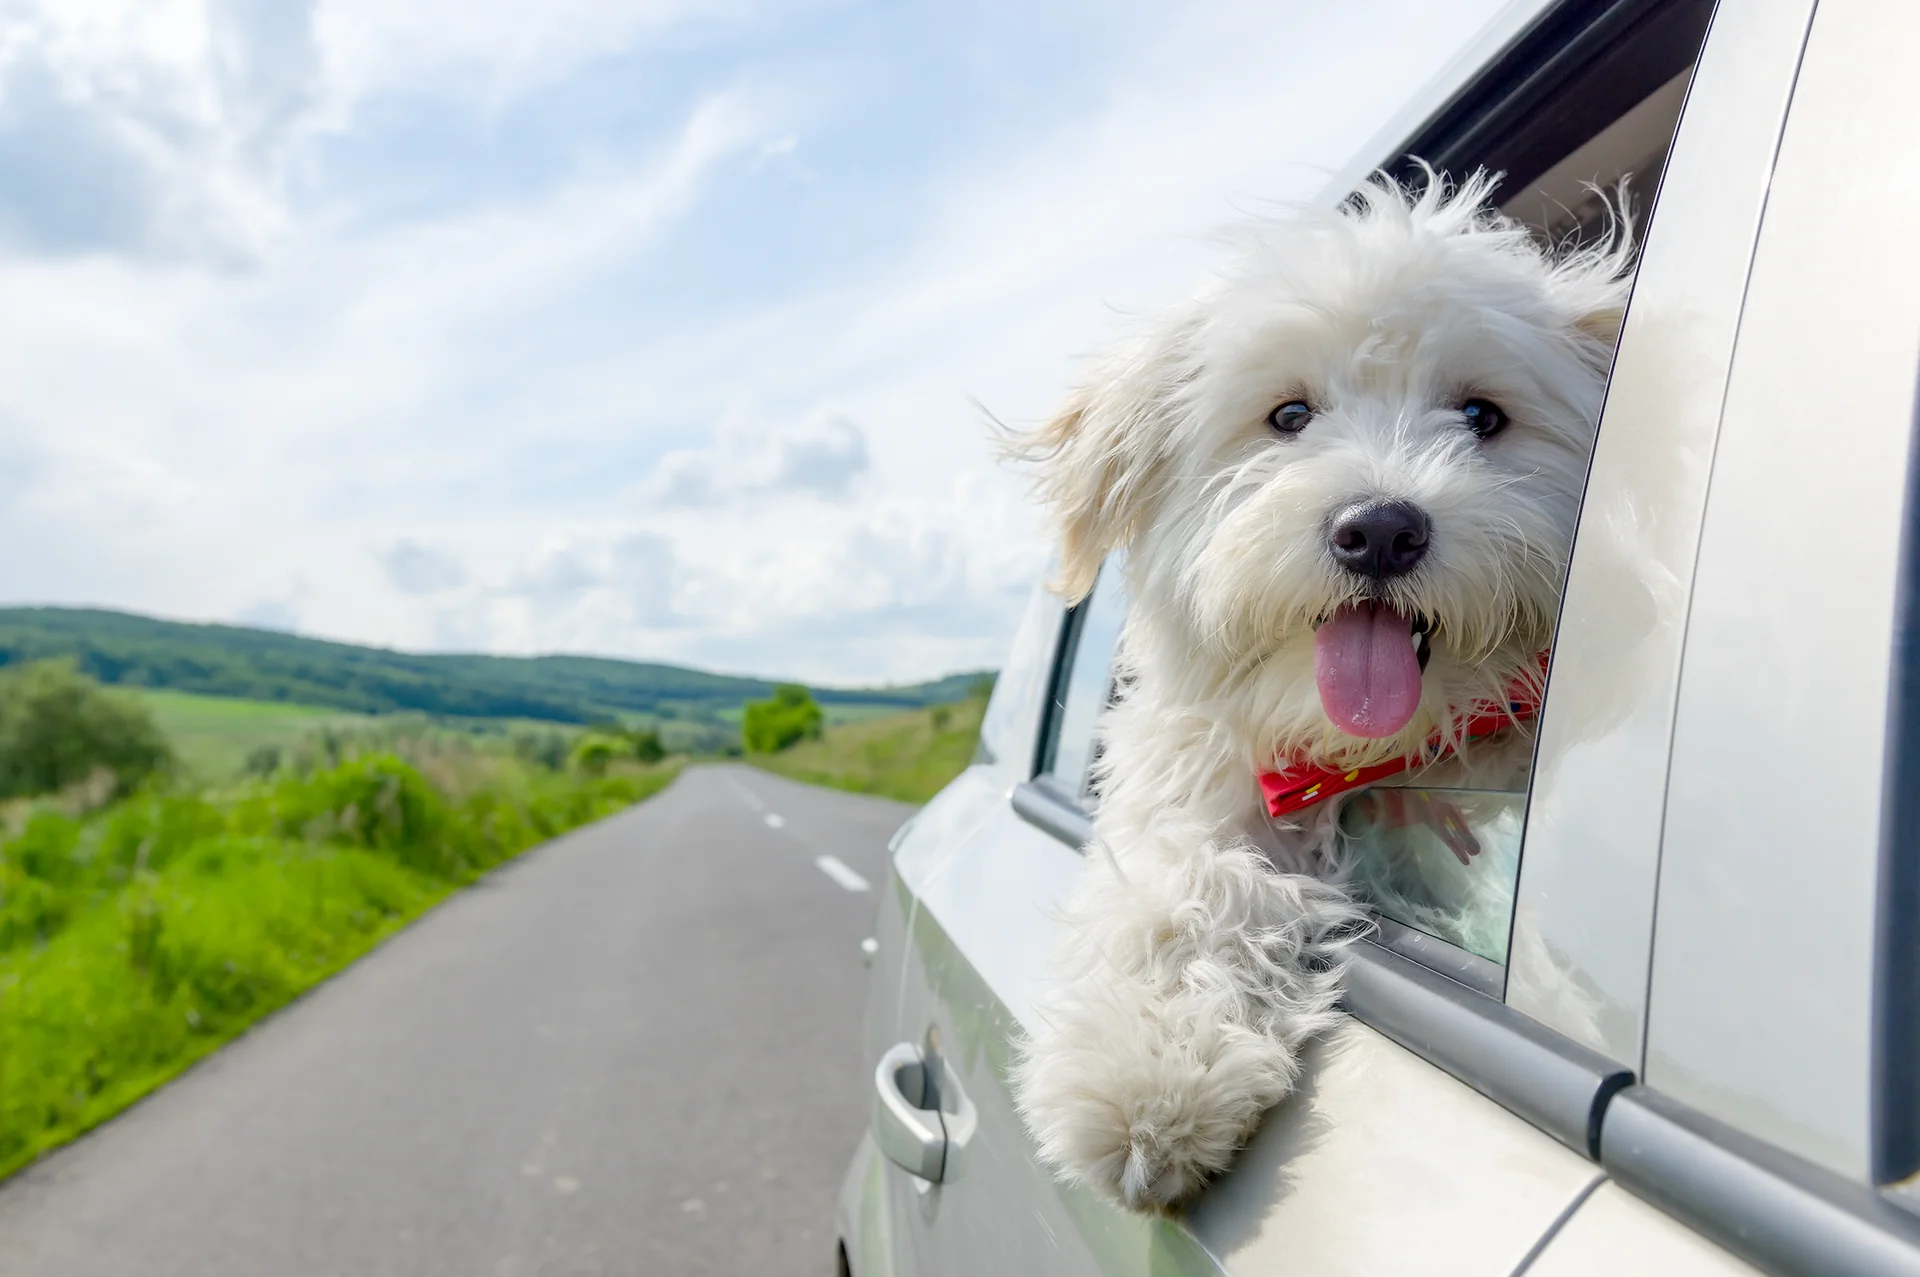 How to make your anxious or car-sick dog feel better in the car